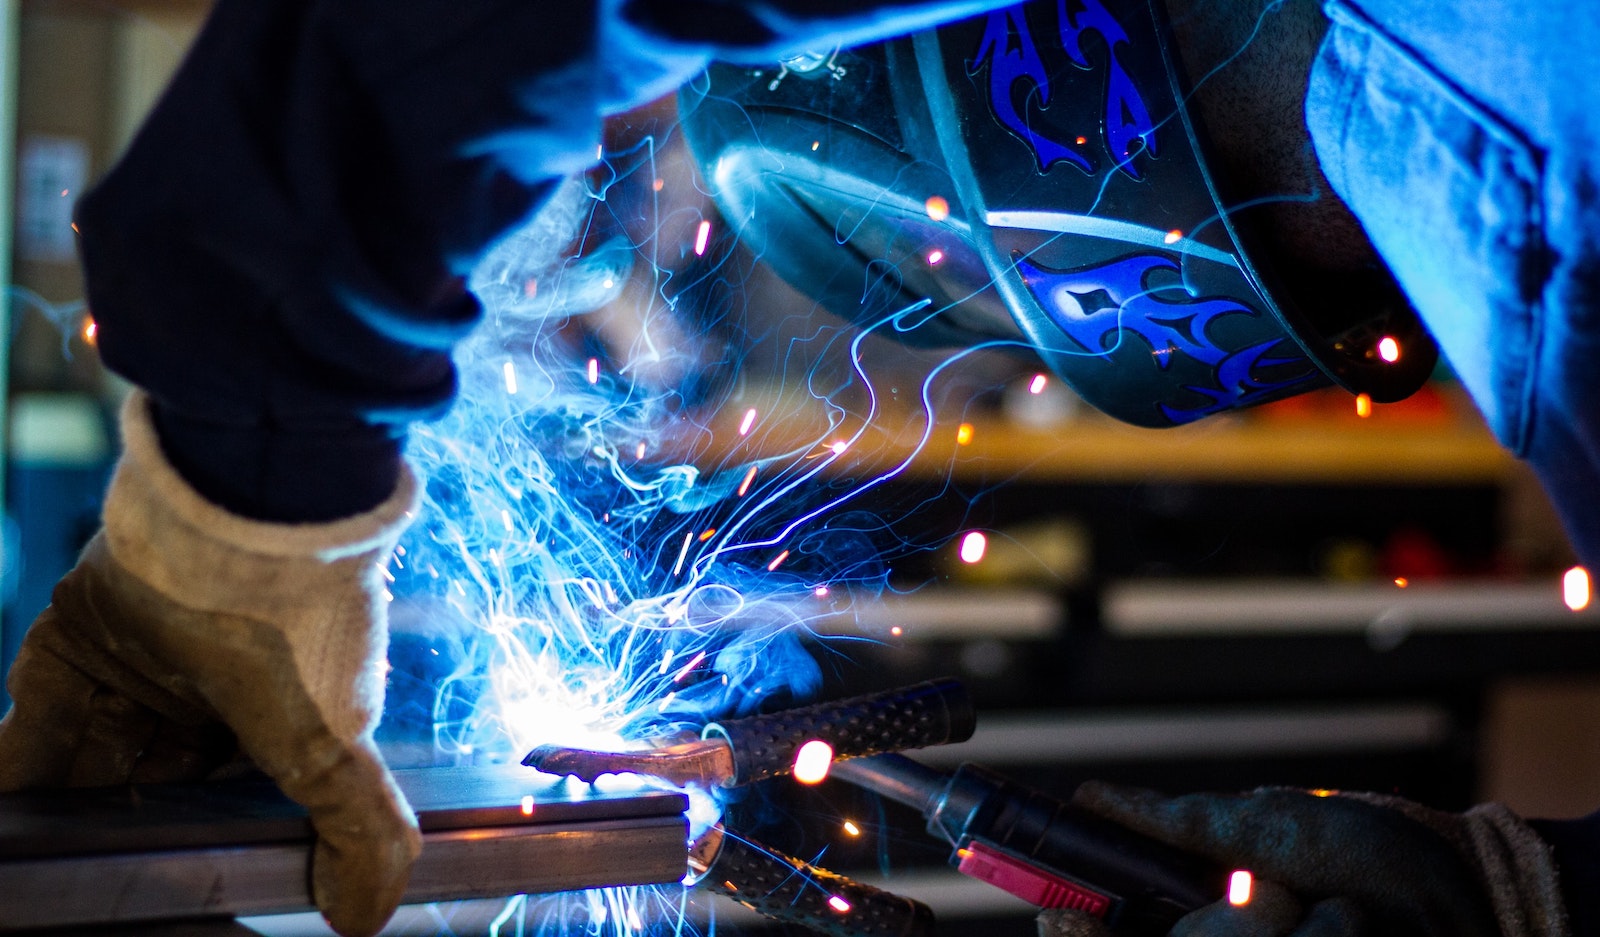 Important safety measures for welders